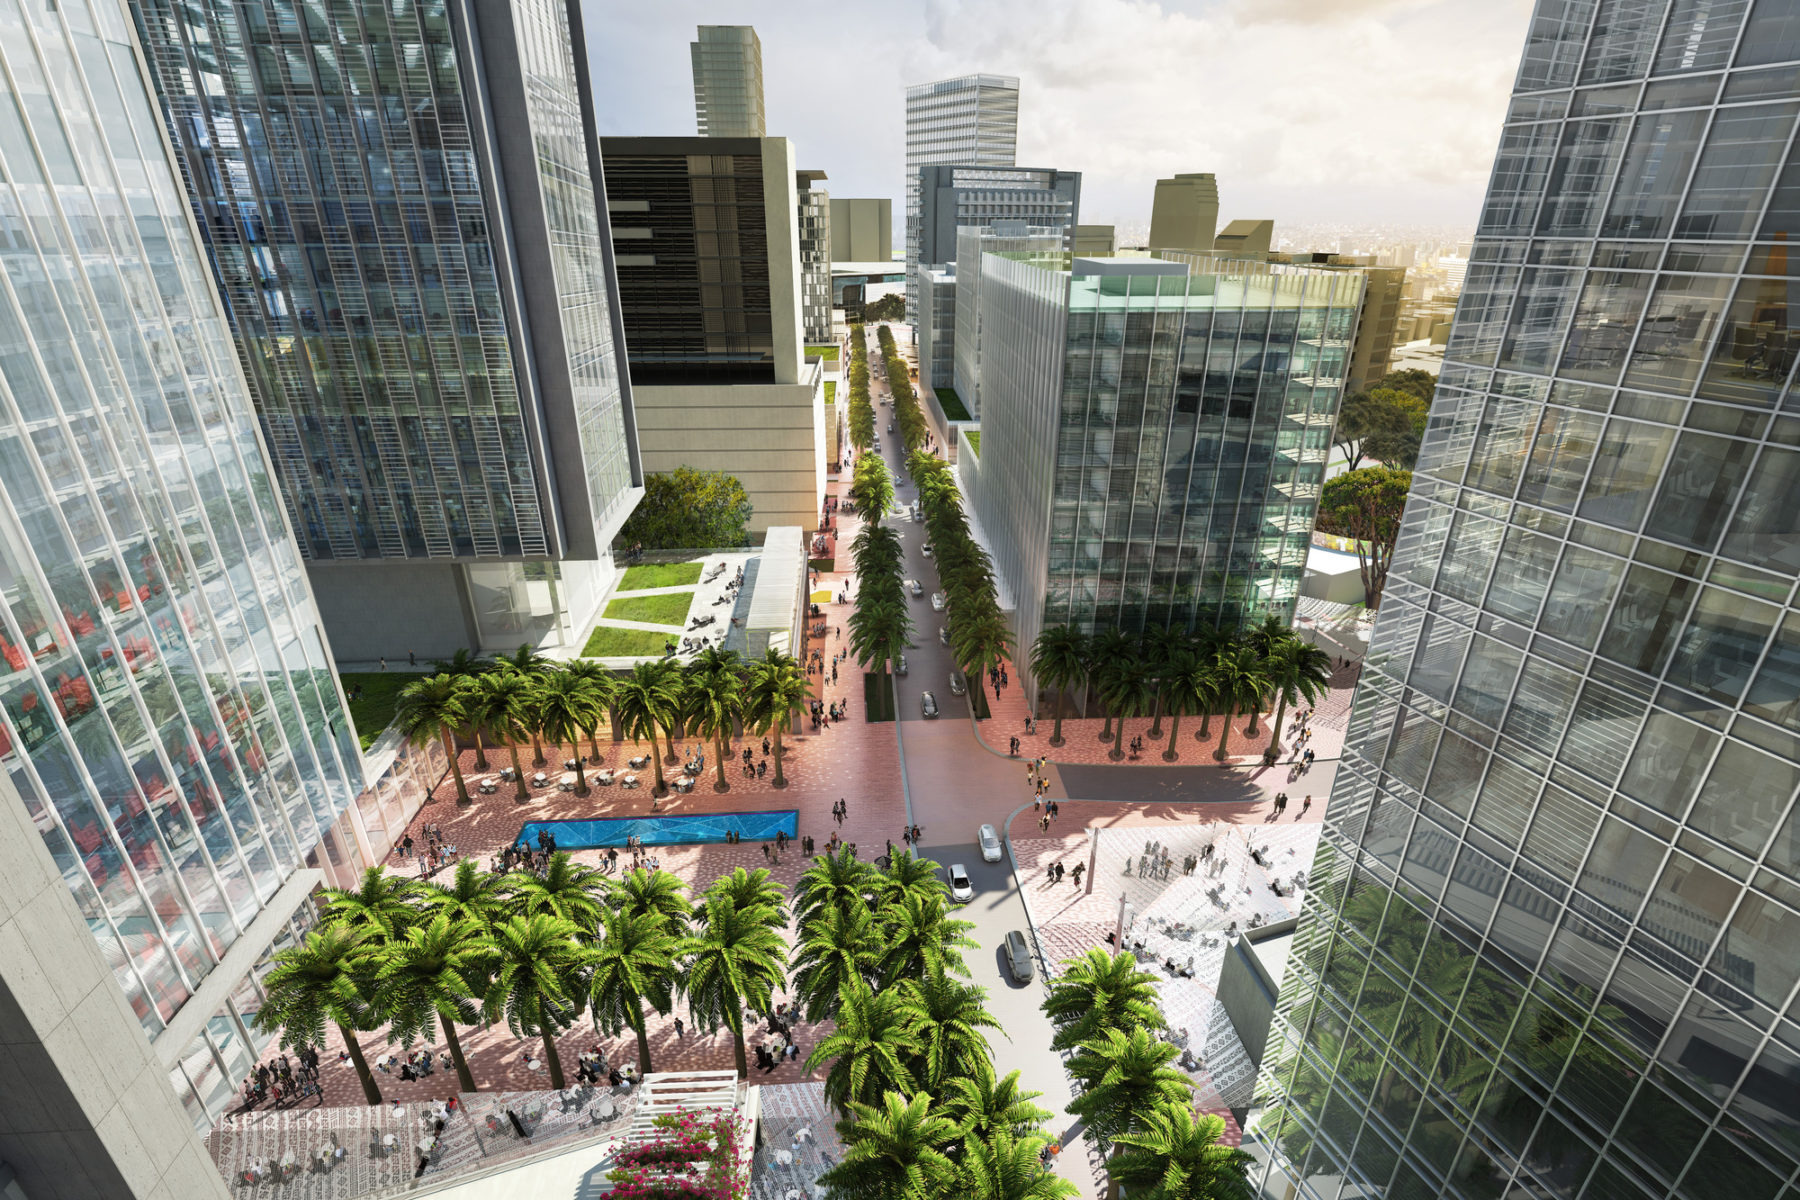 Render of the proposed financial district with heavy foot traffic and streets lined with palm trees